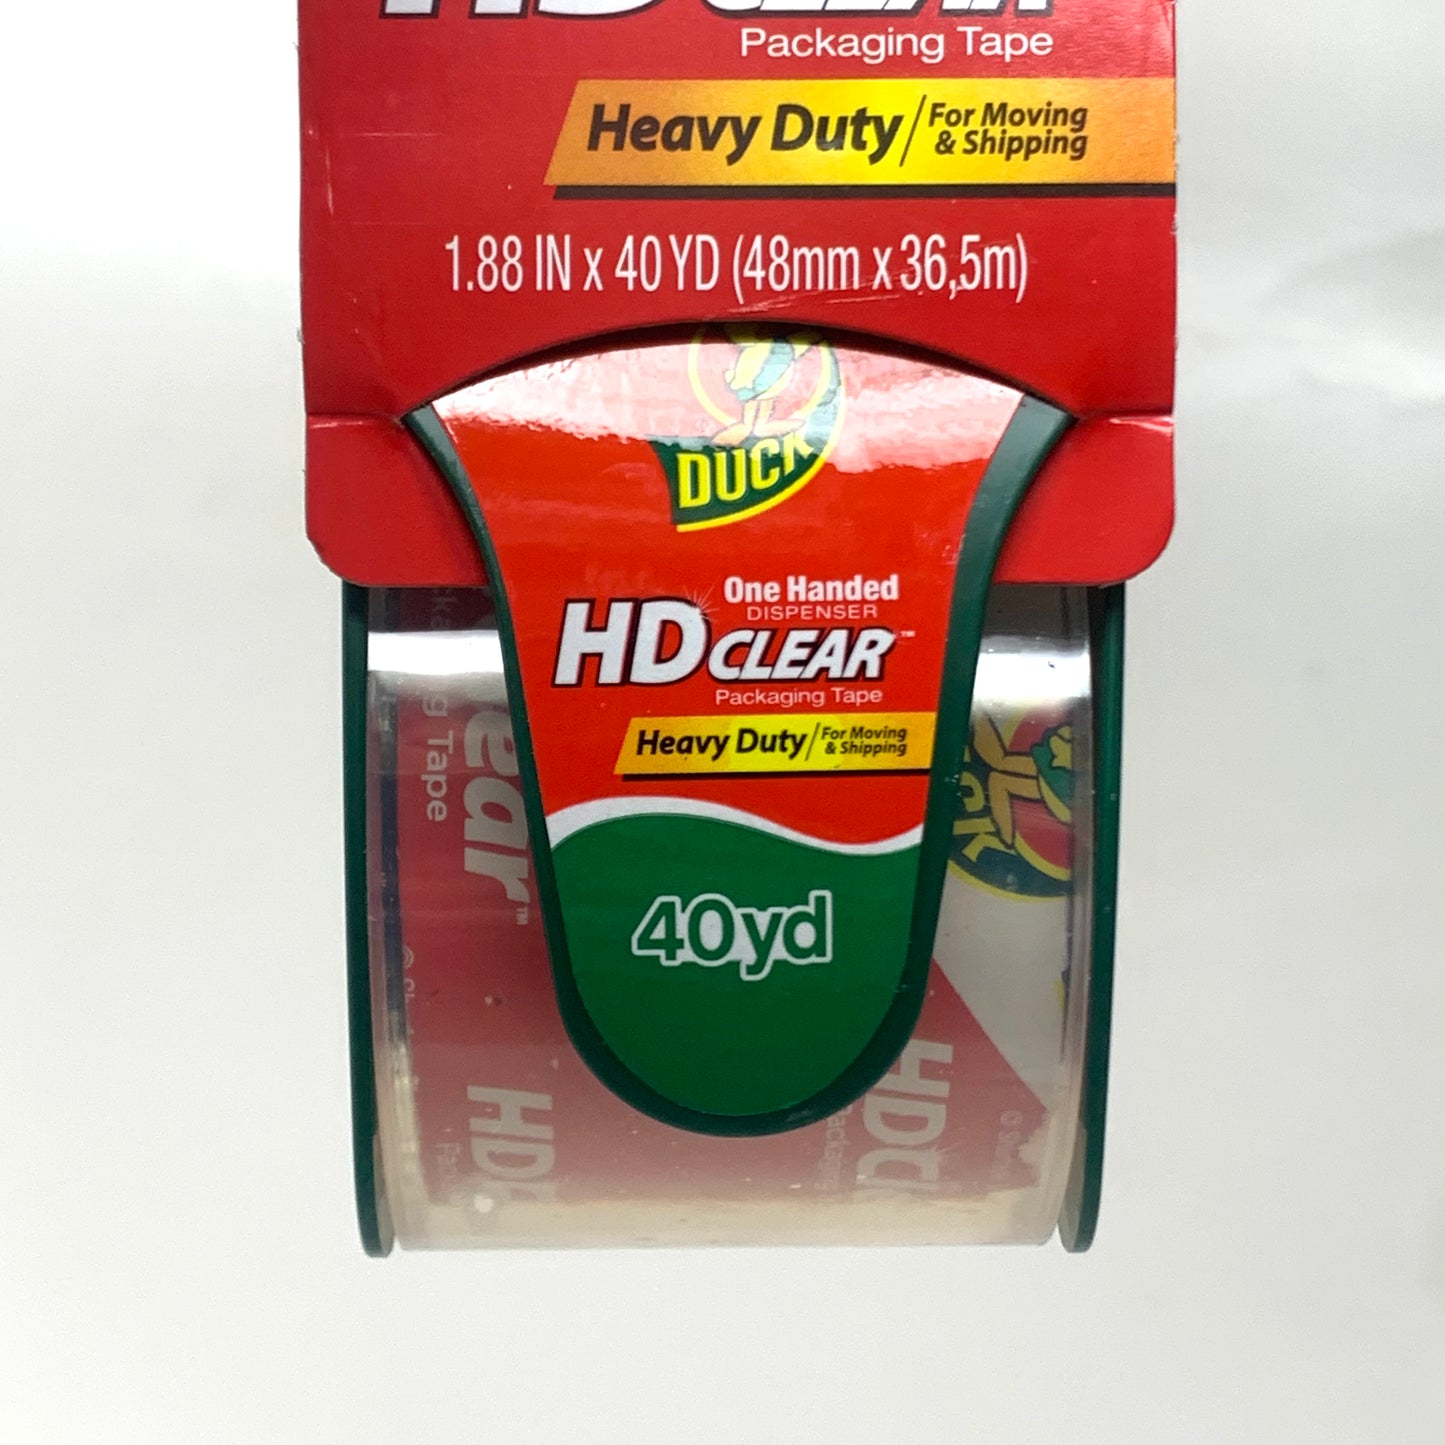 3PK DUCK PACKING TAPE Heavy-Duty Packing Tape 1.88" X 40 YD Clear w/ Dispenser 075353358856